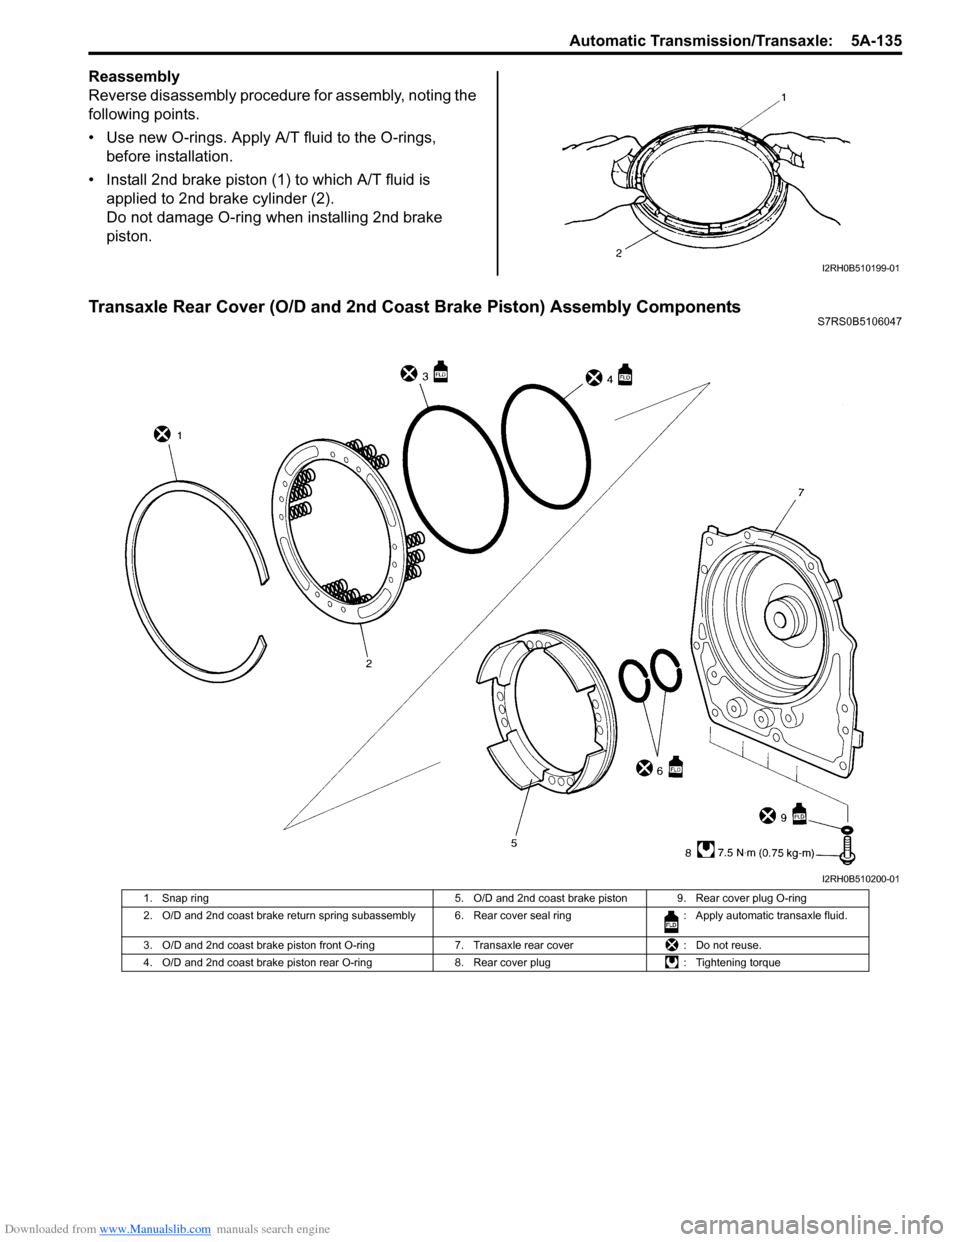 SUZUKI SWIFT 2008 2.G Service Workshop Manual Downloaded from www.Manualslib.com manuals search engine Automatic Transmission/Transaxle:  5A-135
Reassembly
Reverse disassembly procedure for assembly, noting the 
following points.
• Use new O-ri